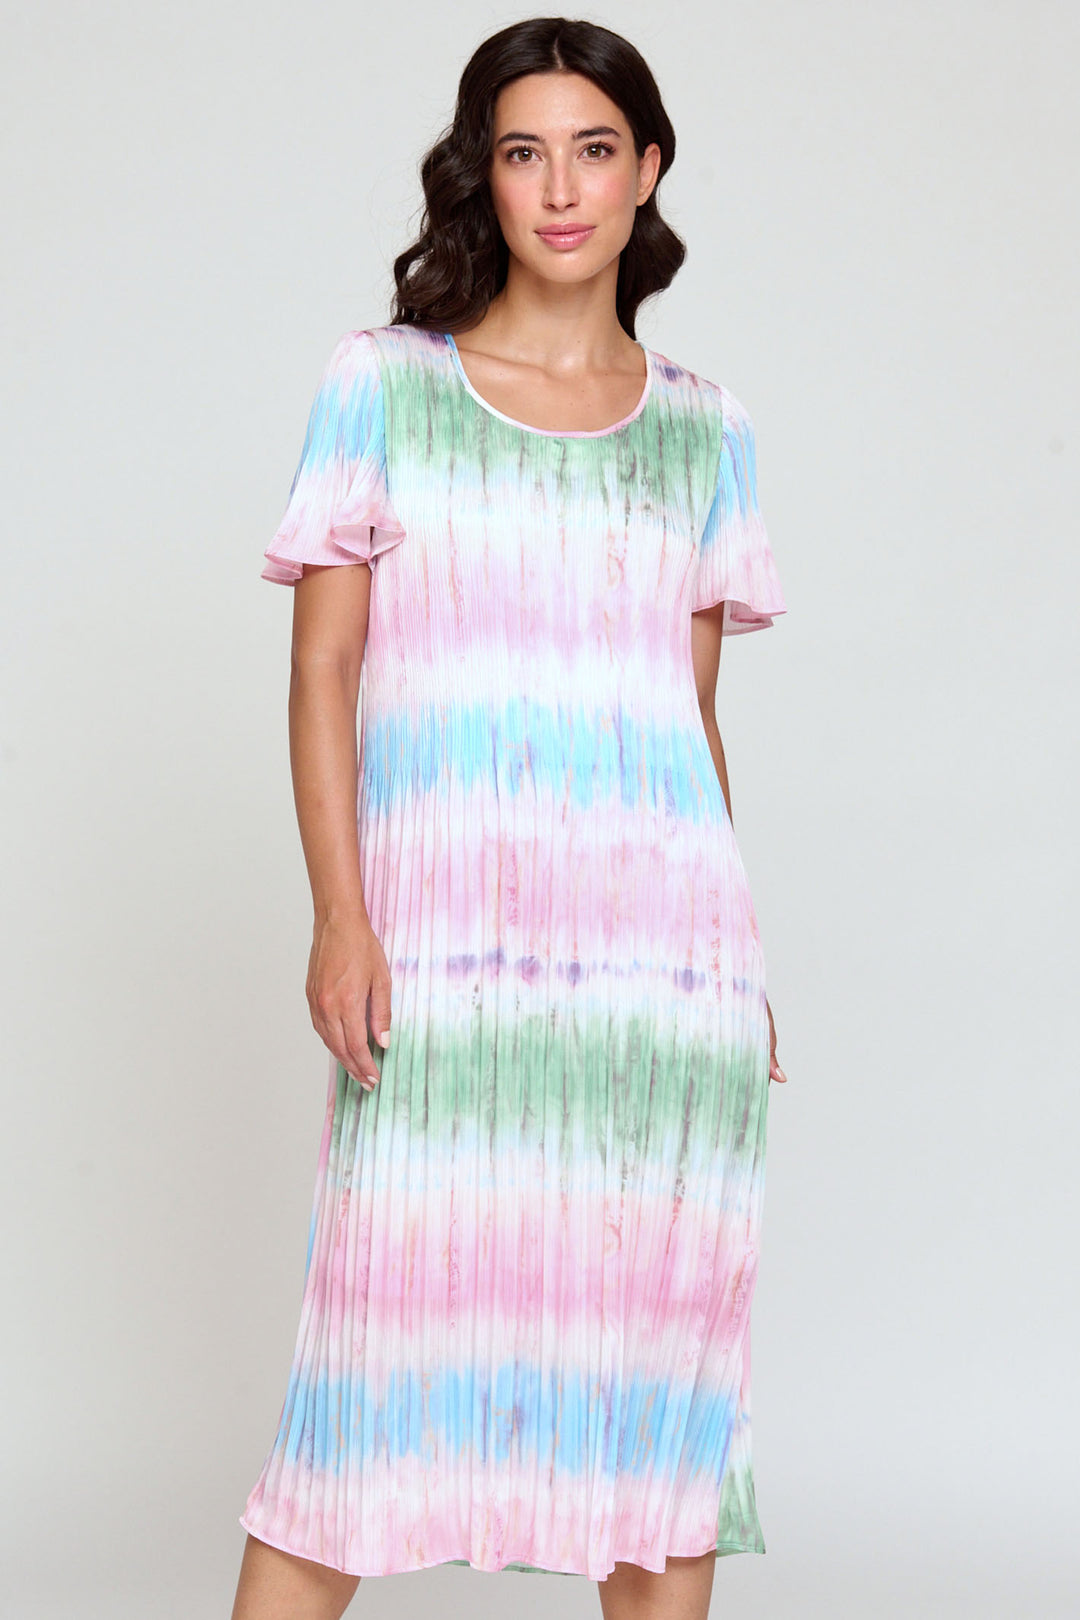 Bariloche Cayena Pink Tie-Dye Print Short Sleeved Midi Dress - Rouge Boutique Inverness